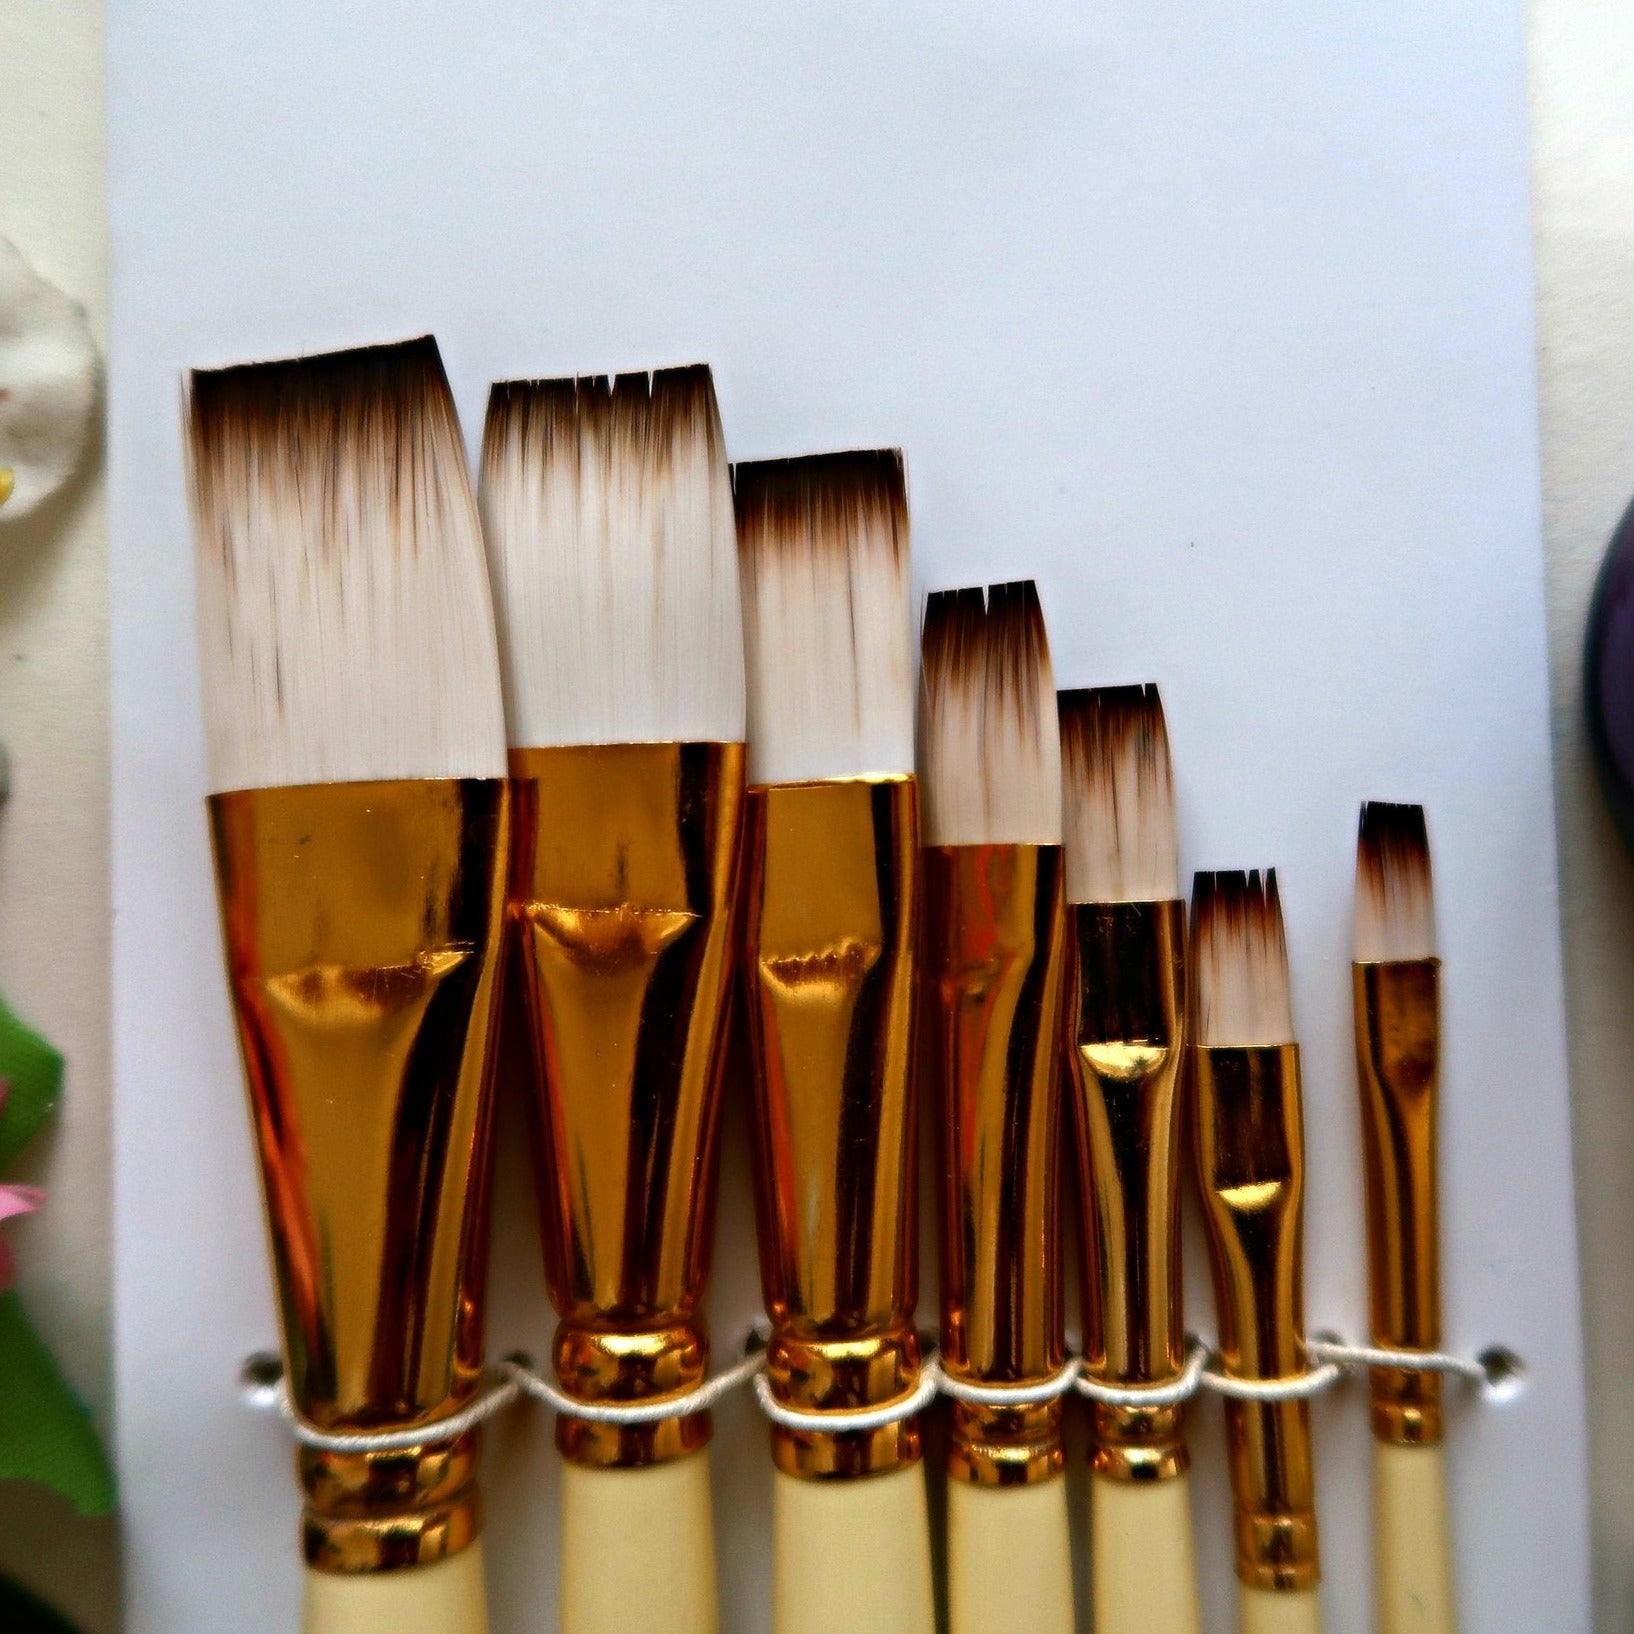 PAINTING BRUSHES FLAT - Flat synthetic hair brushes for painting by Artyshils Art